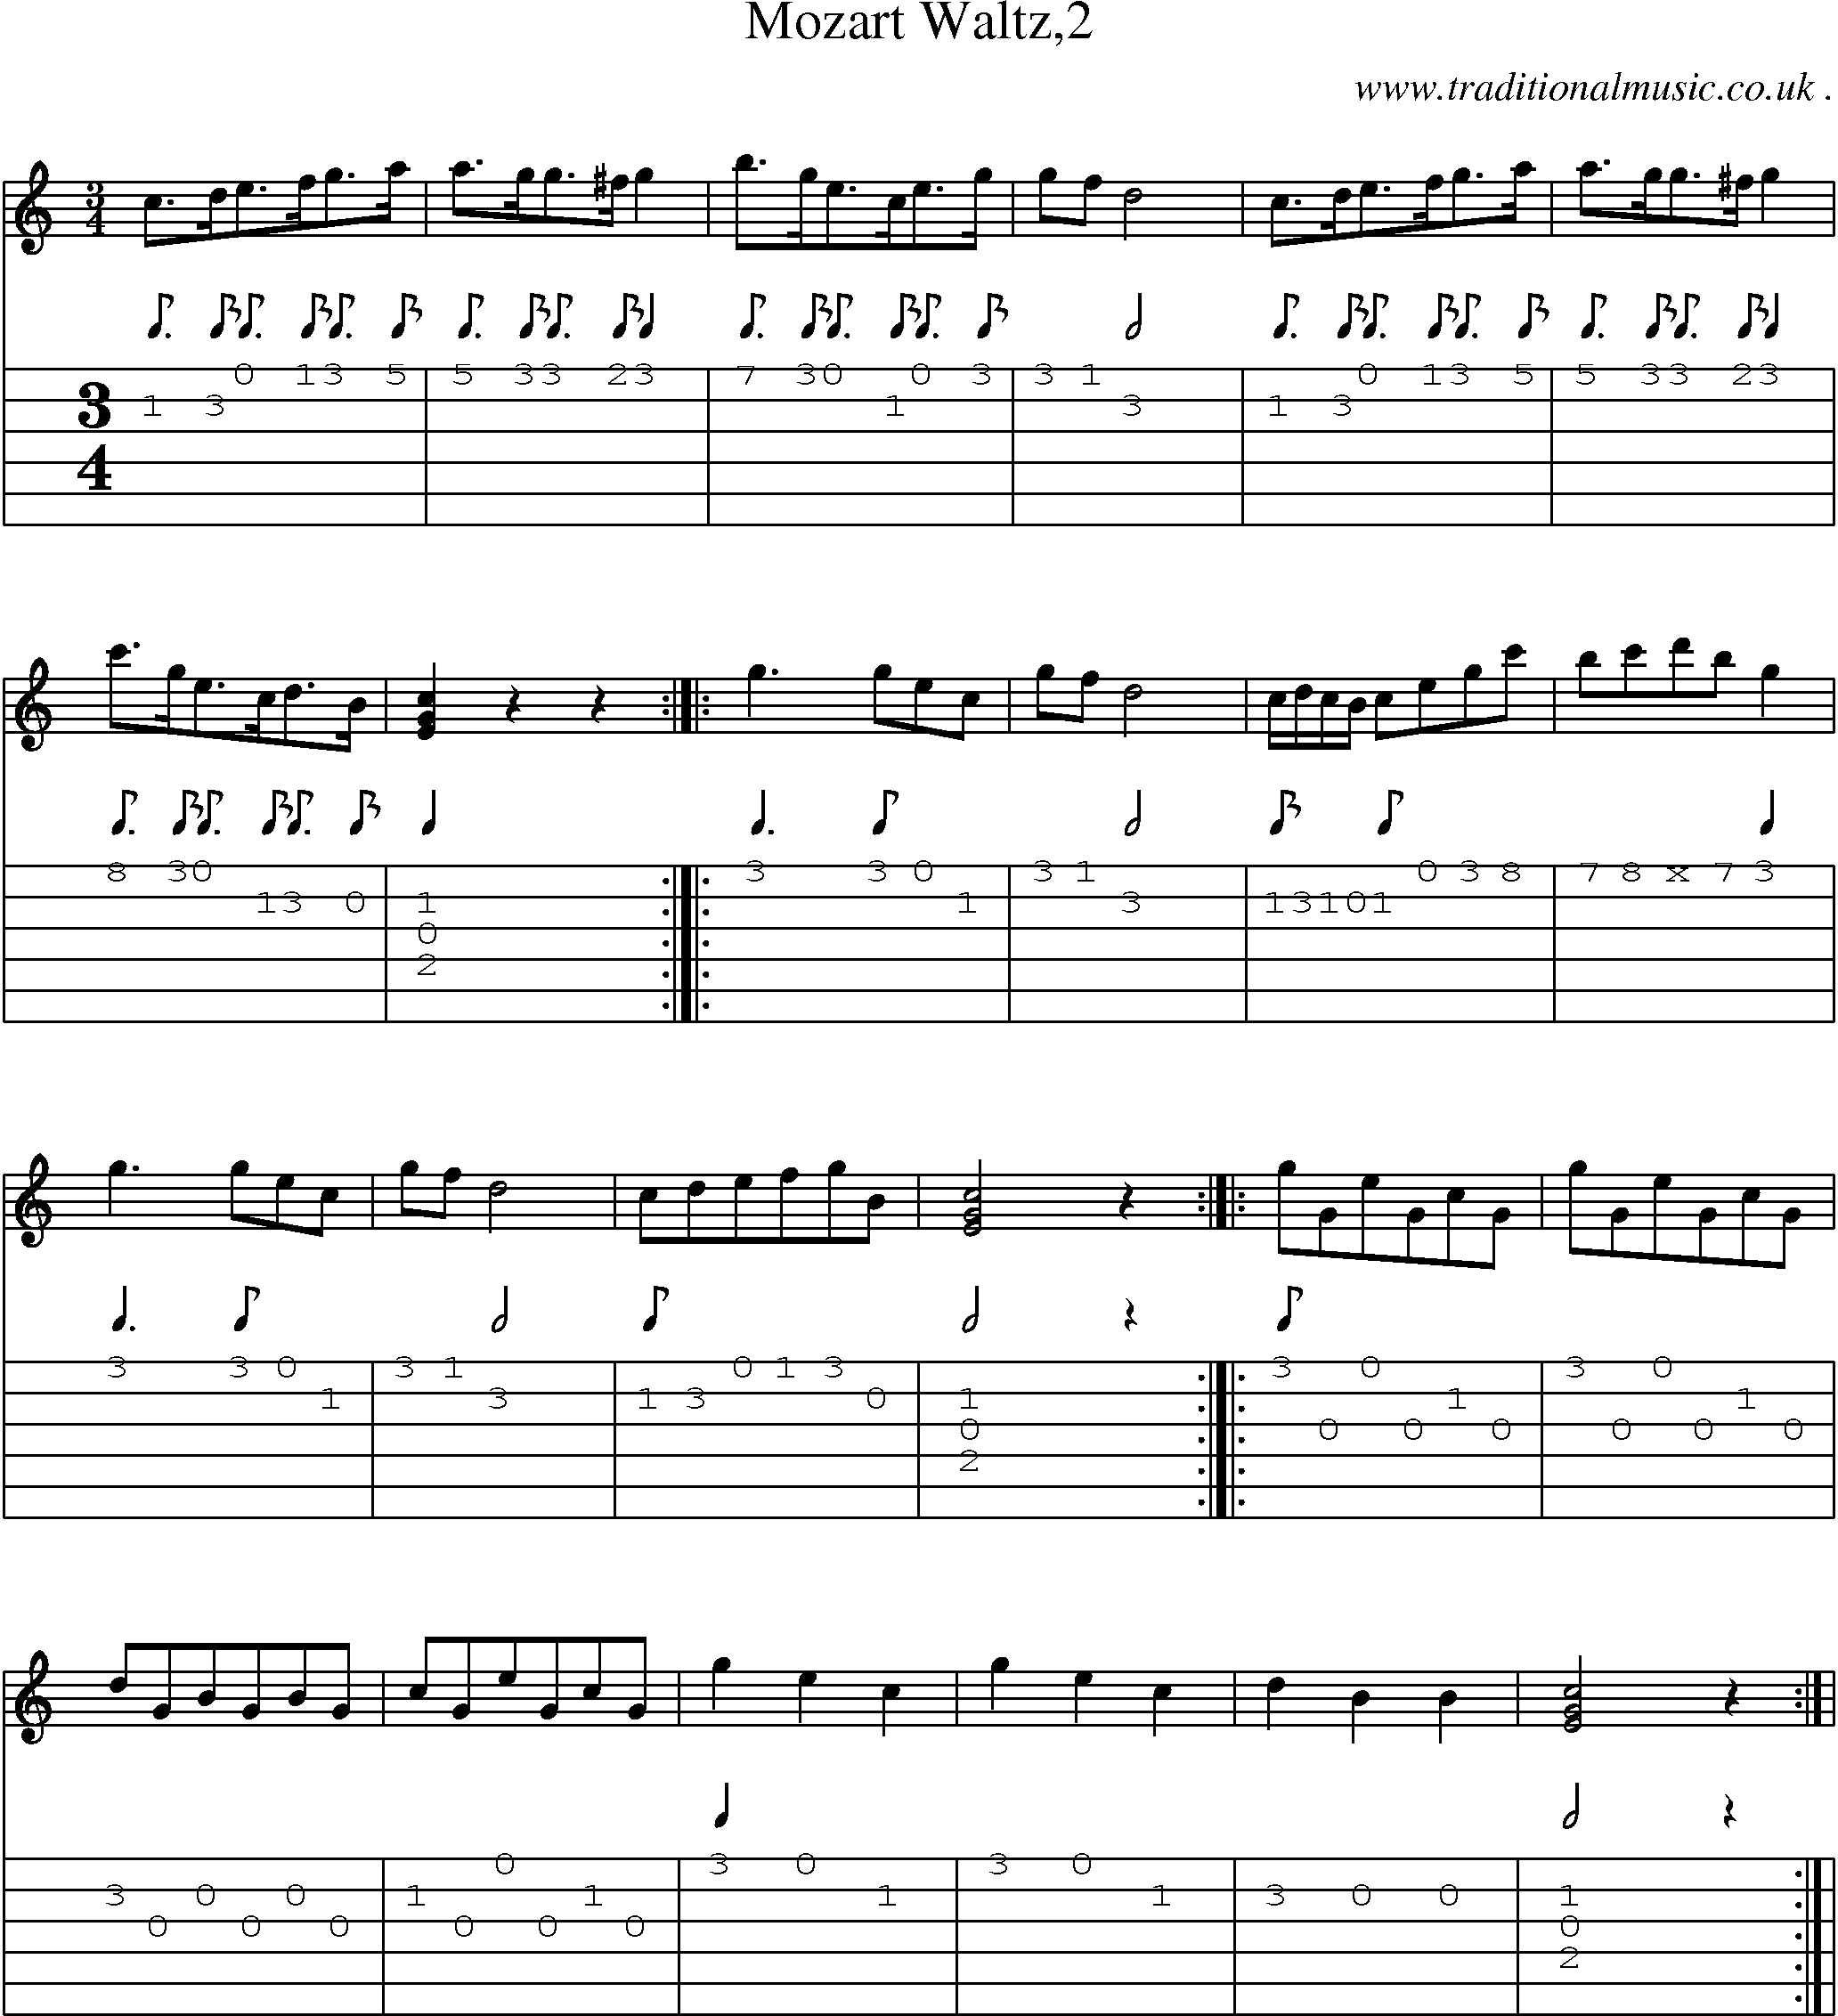 Sheet-Music and Guitar Tabs for Mozart Waltz2